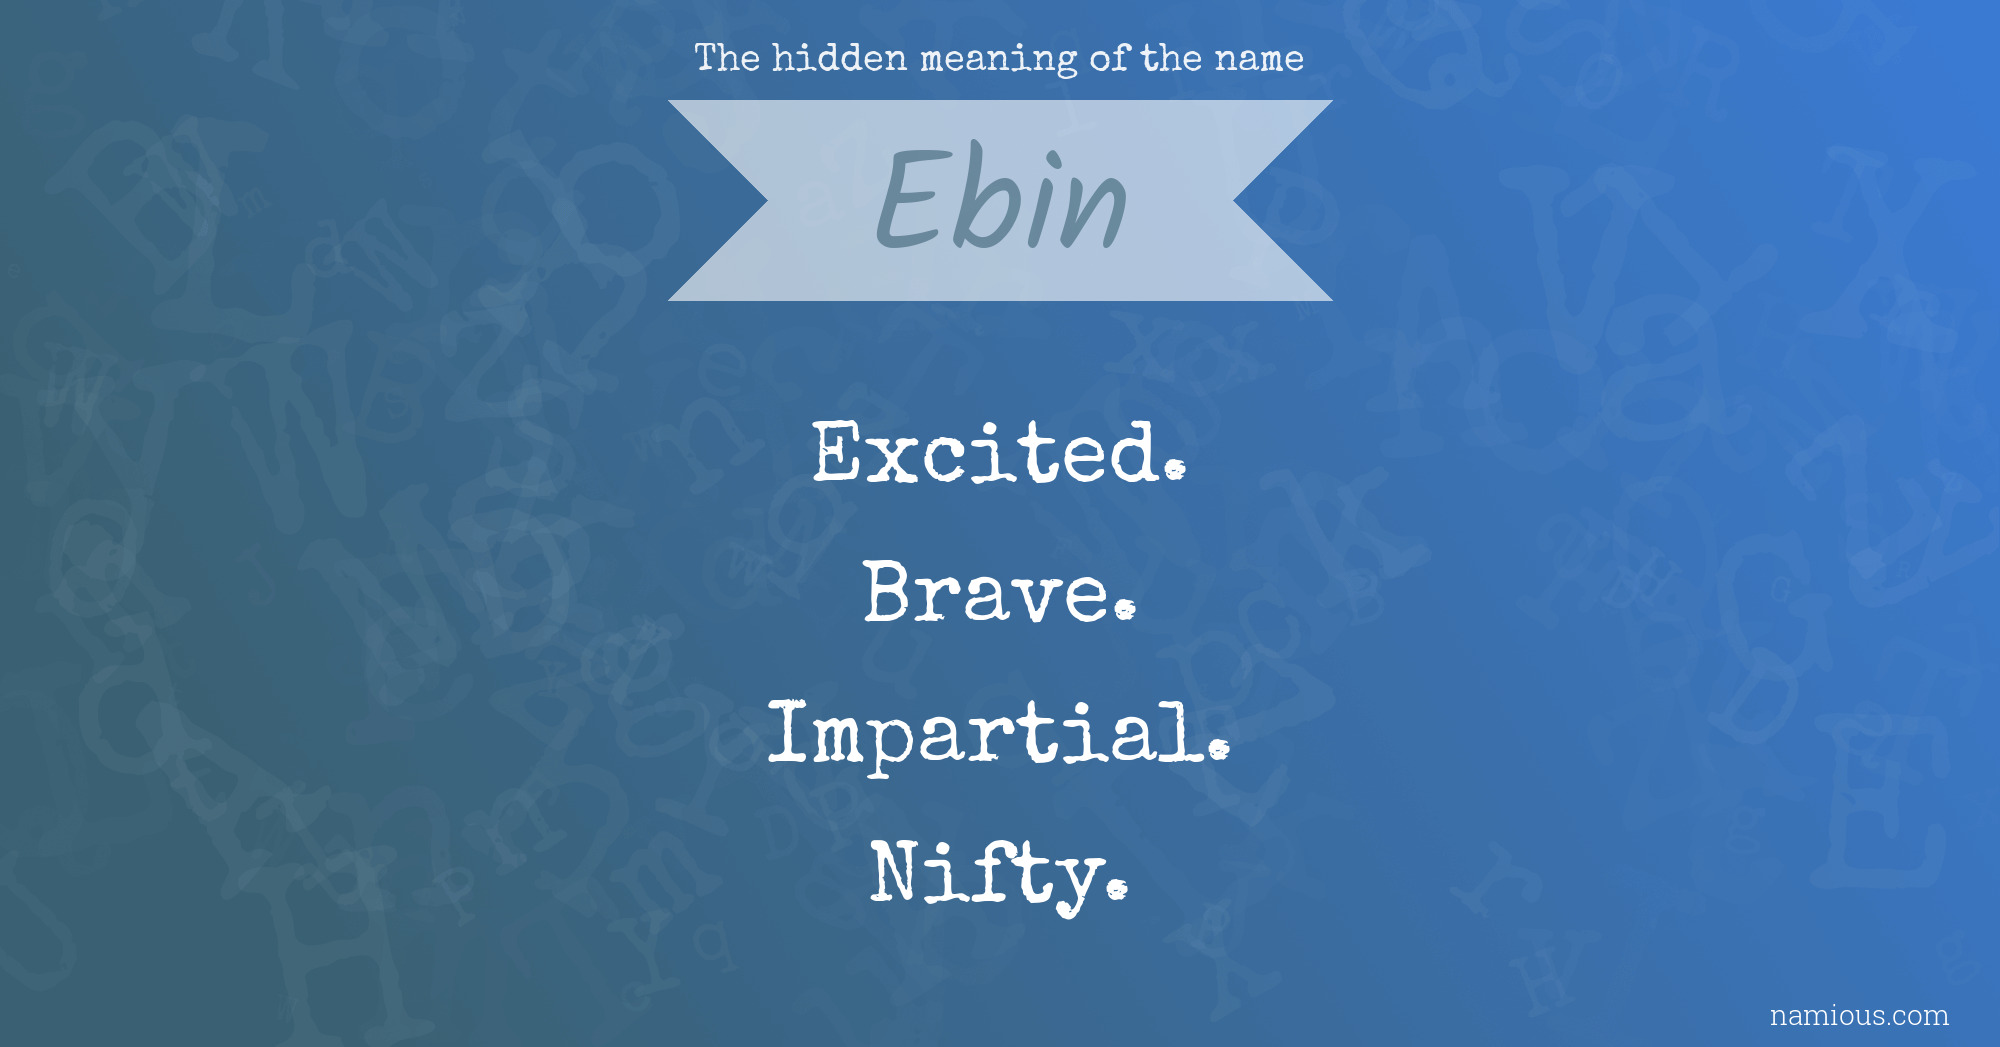 The hidden meaning of the name Ebin